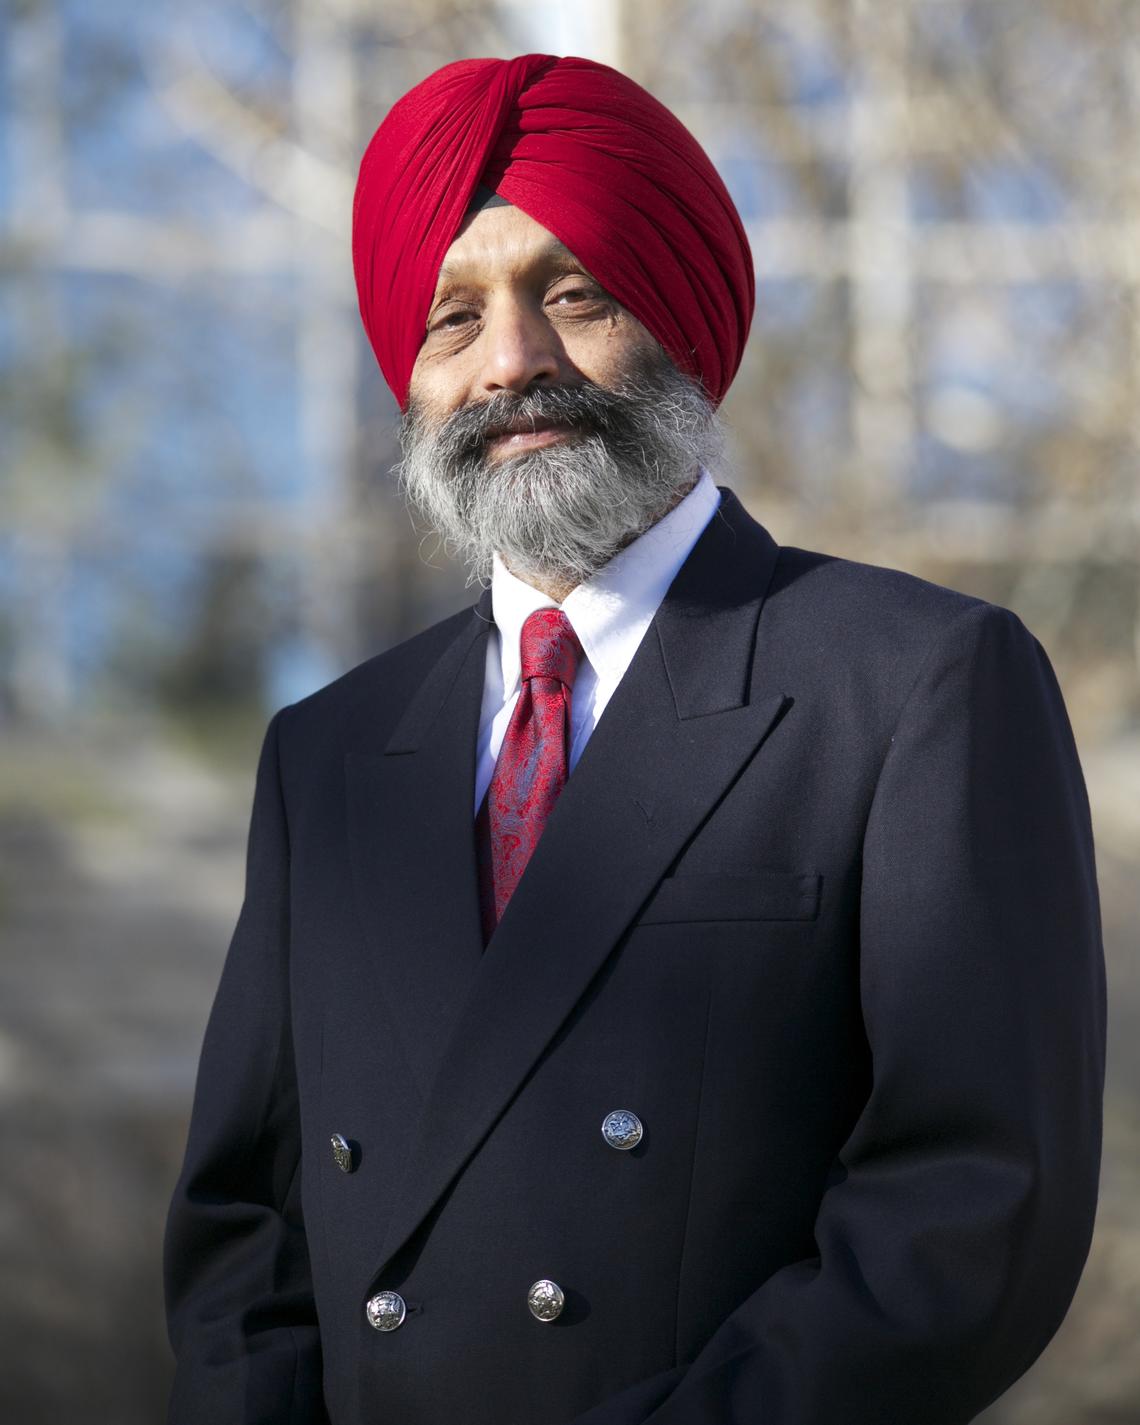 Says Baljit Singh, recently appointed as dean of the Faculty of Veterinary Medicine at the University of Calgary: “I don’t think there’s any other program around that has this type of collaborative arrangement within the faculty and with the communities outside the university.”